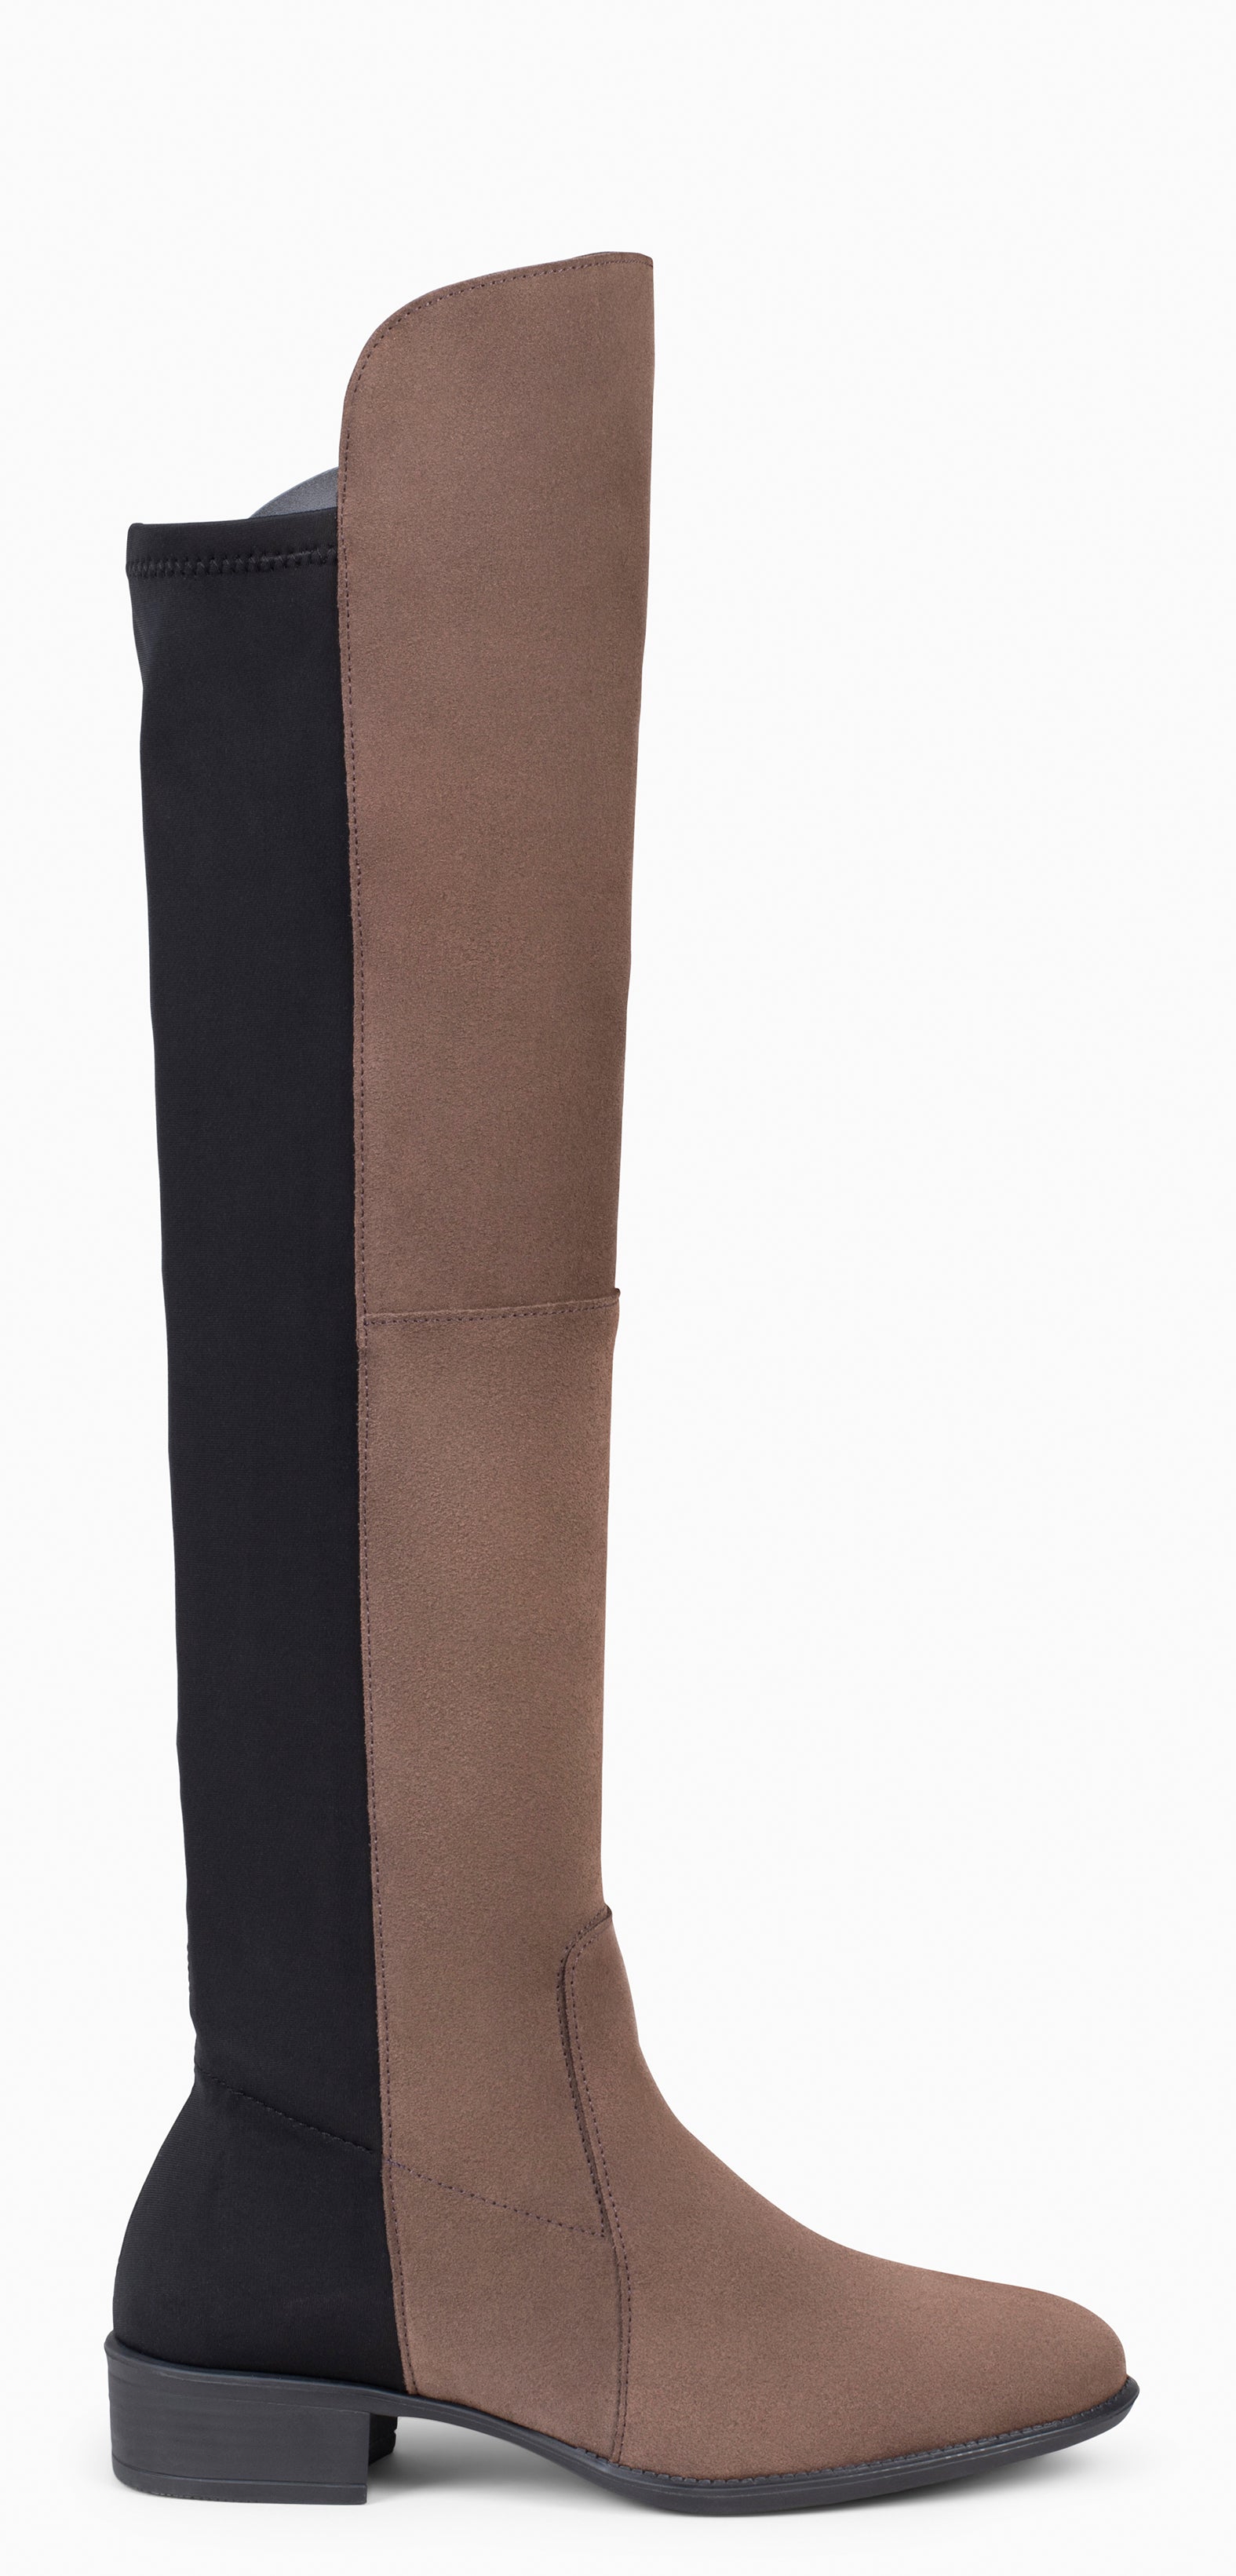 ELASTIC – TAUPE knee-high and low heel boot